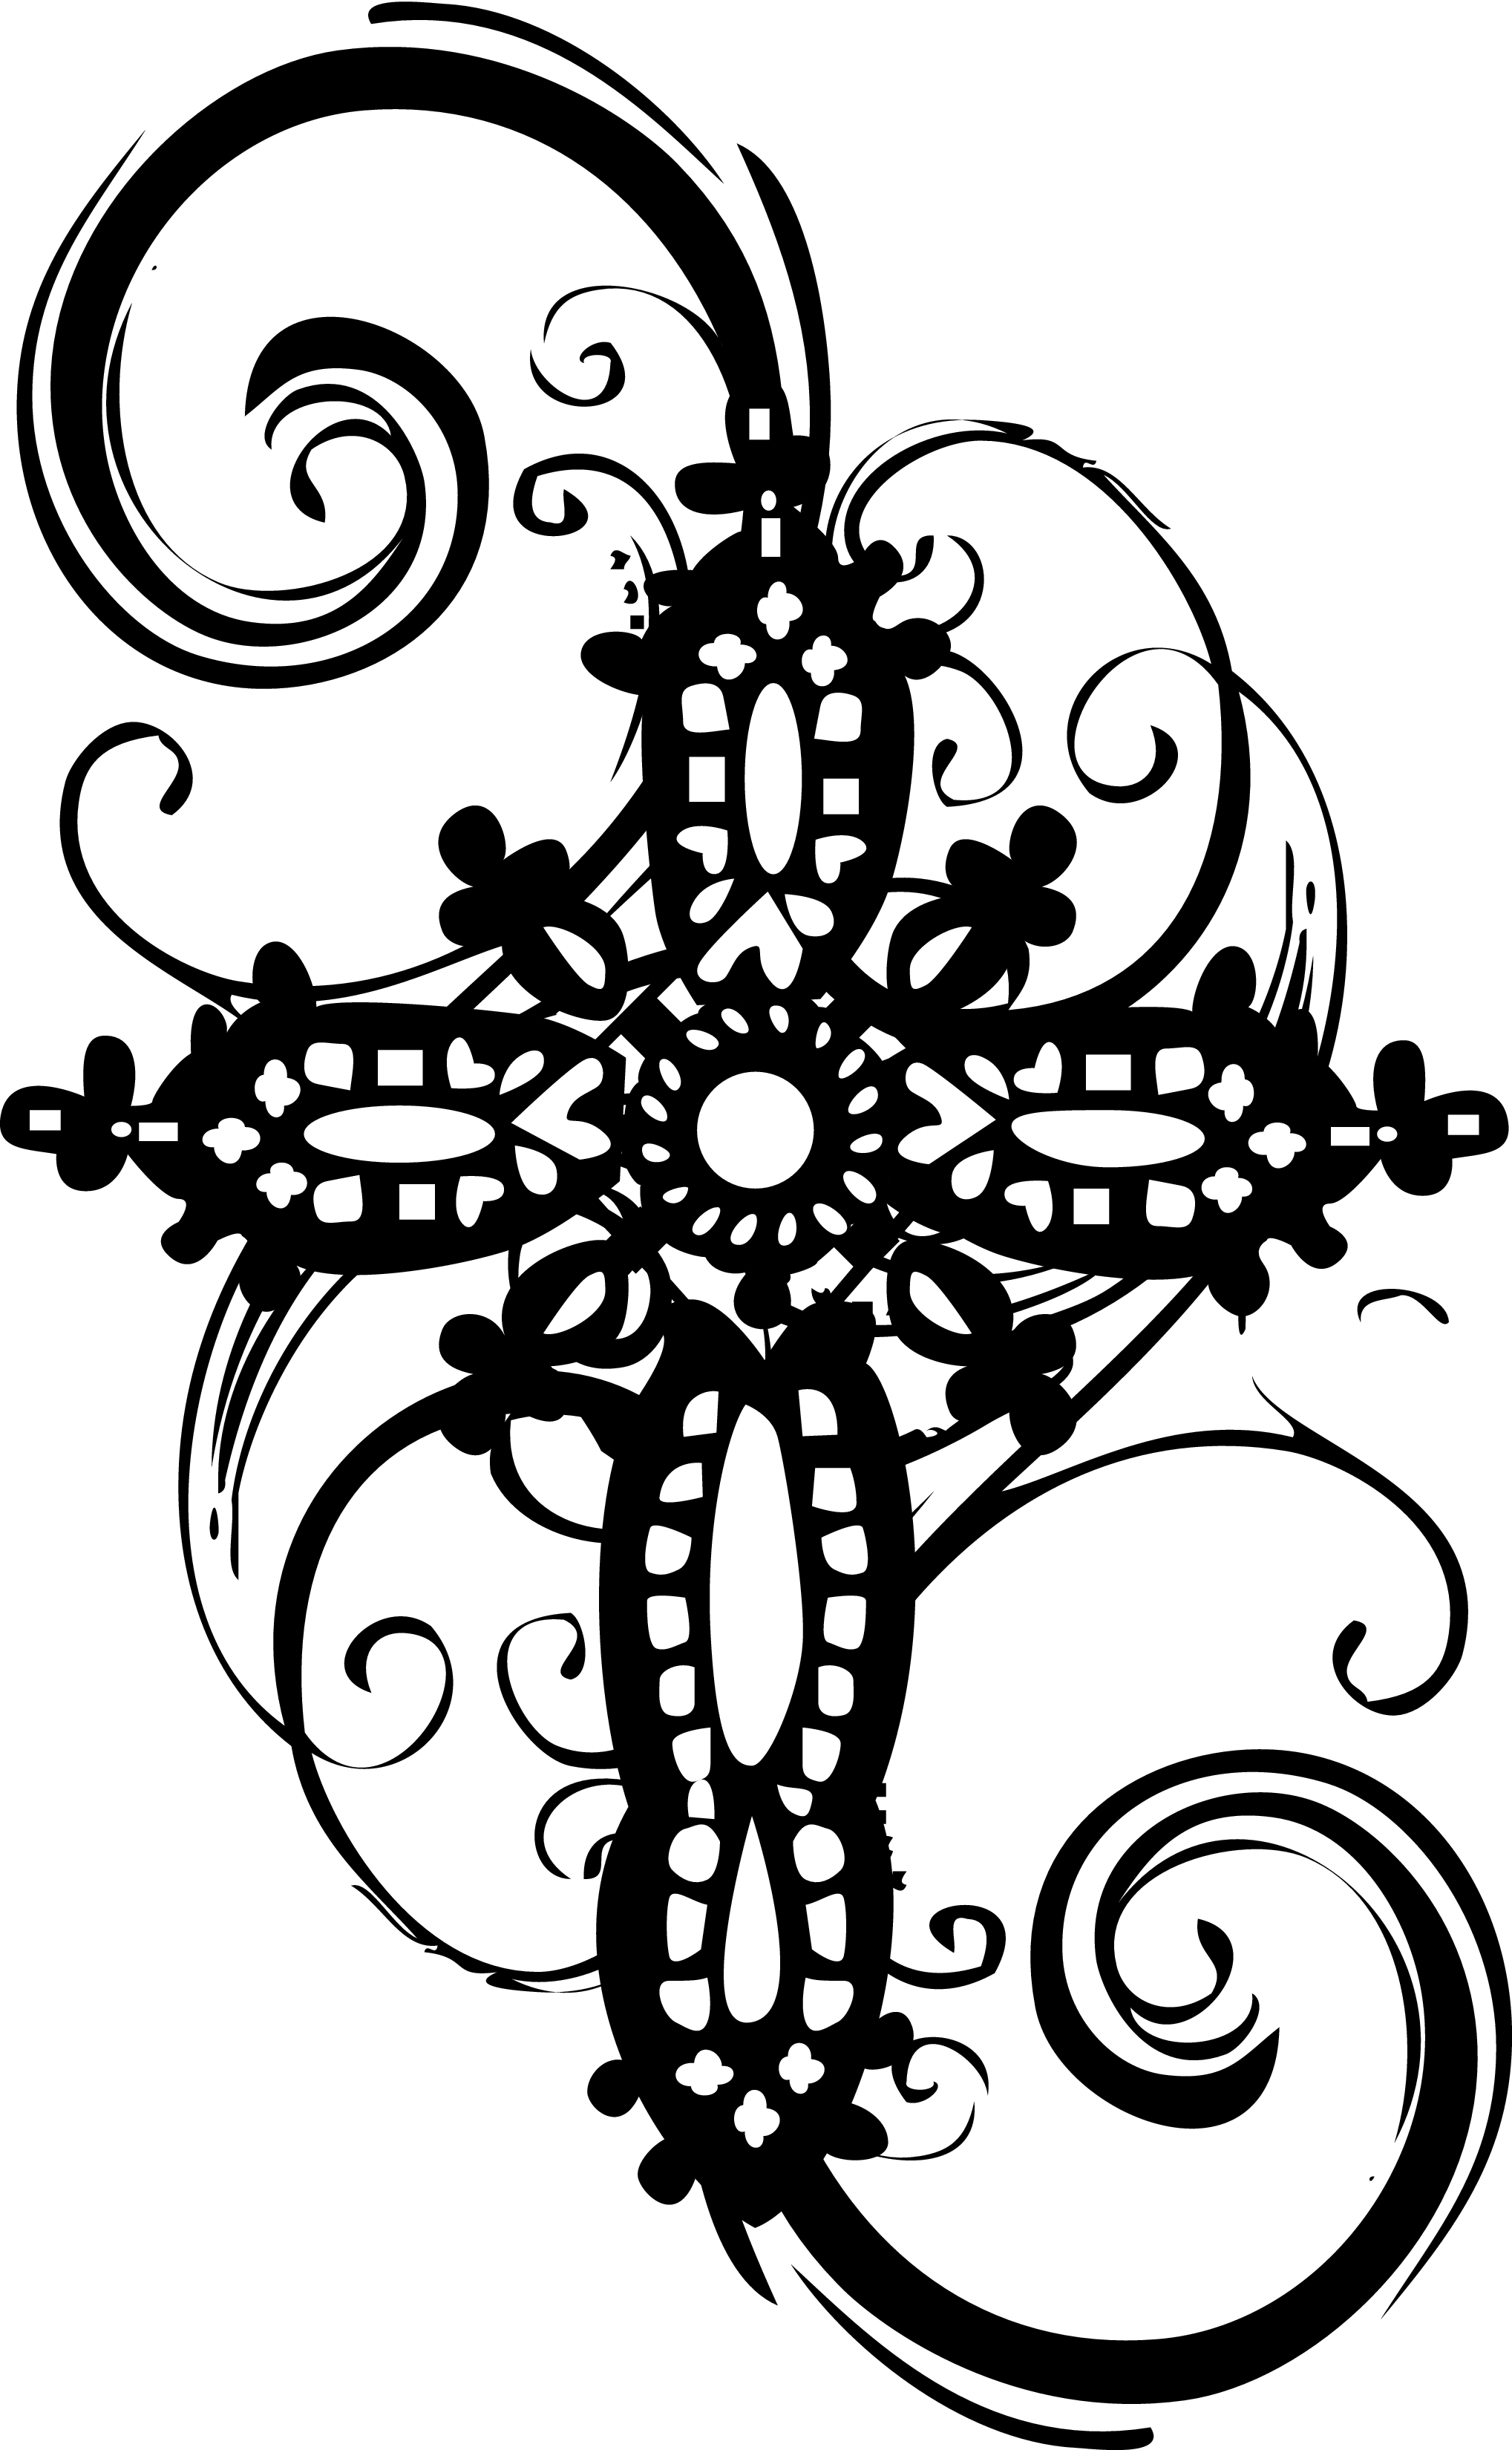 White Cross Clipart | Clipart Panda - Free Clipart Images